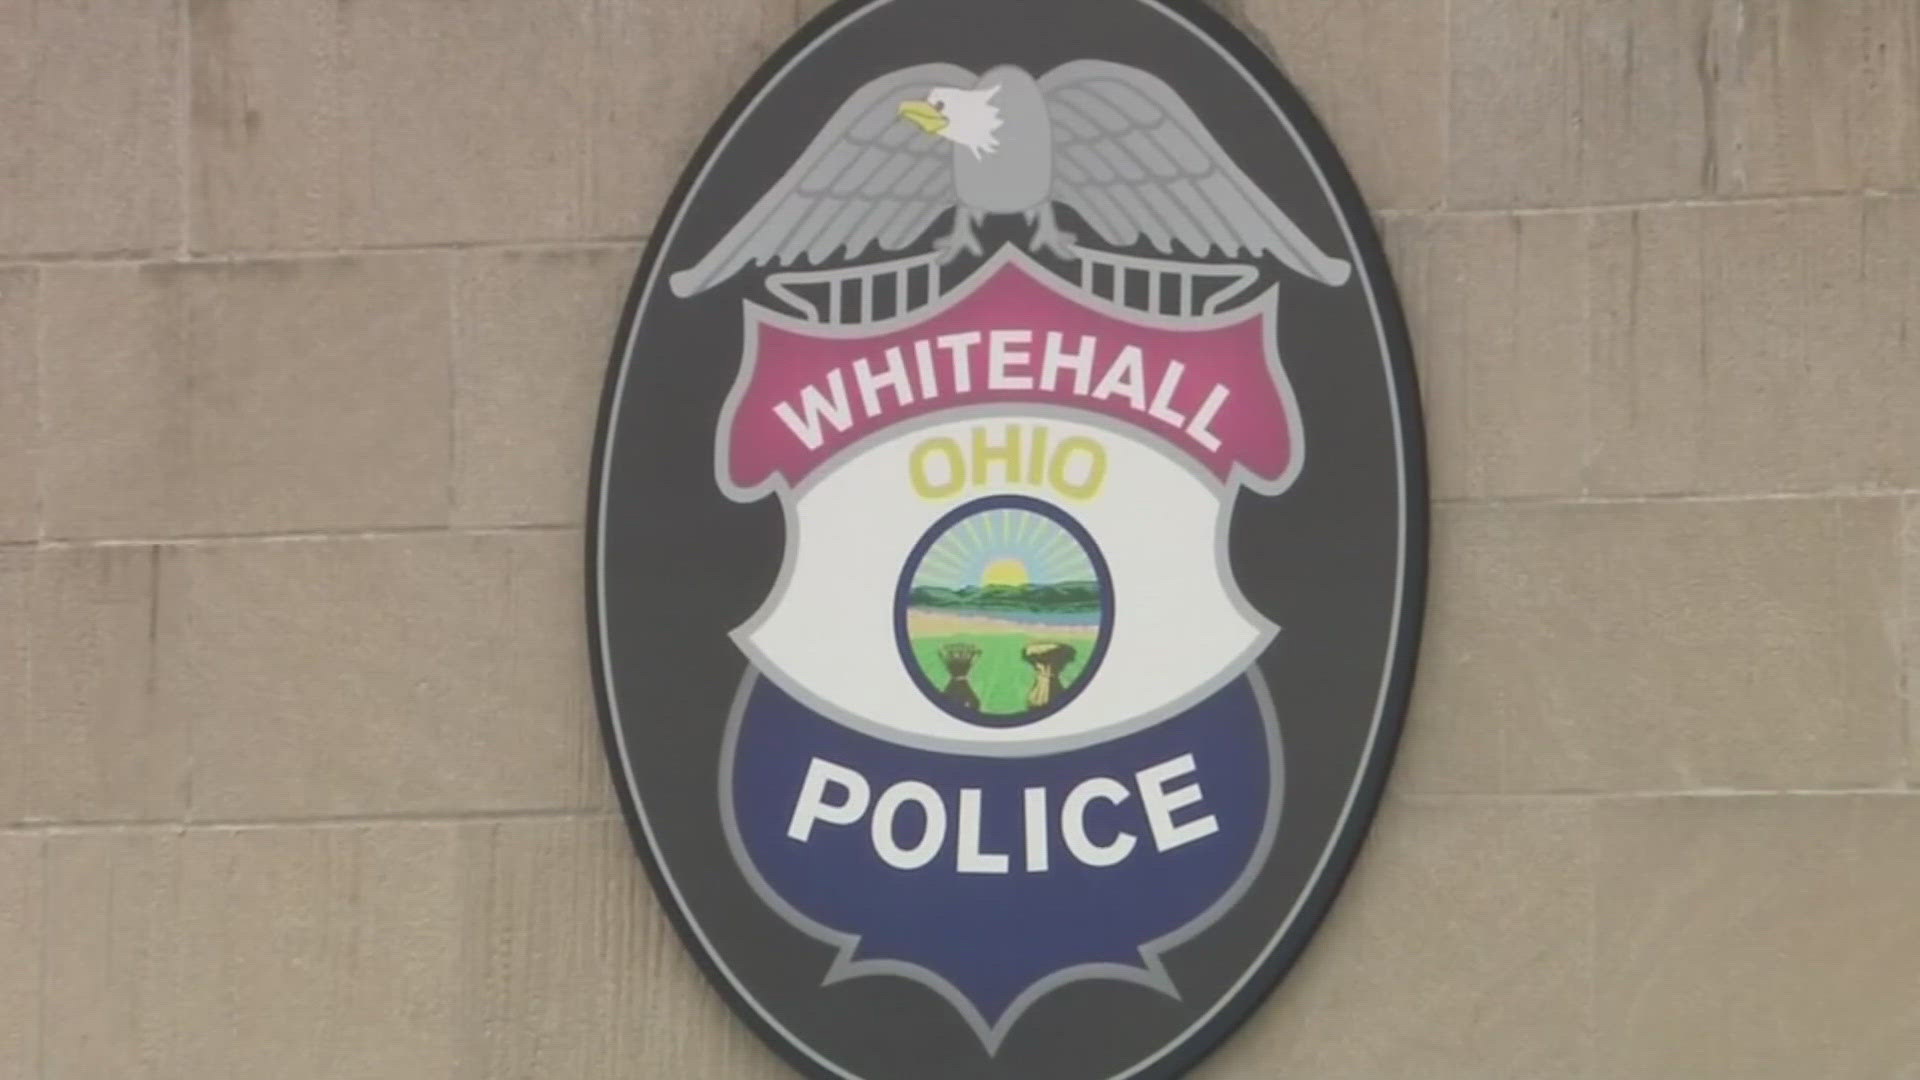 The Whitehall Division of Police is planning to couple two pieces of technology to help crack down on crime in the city.